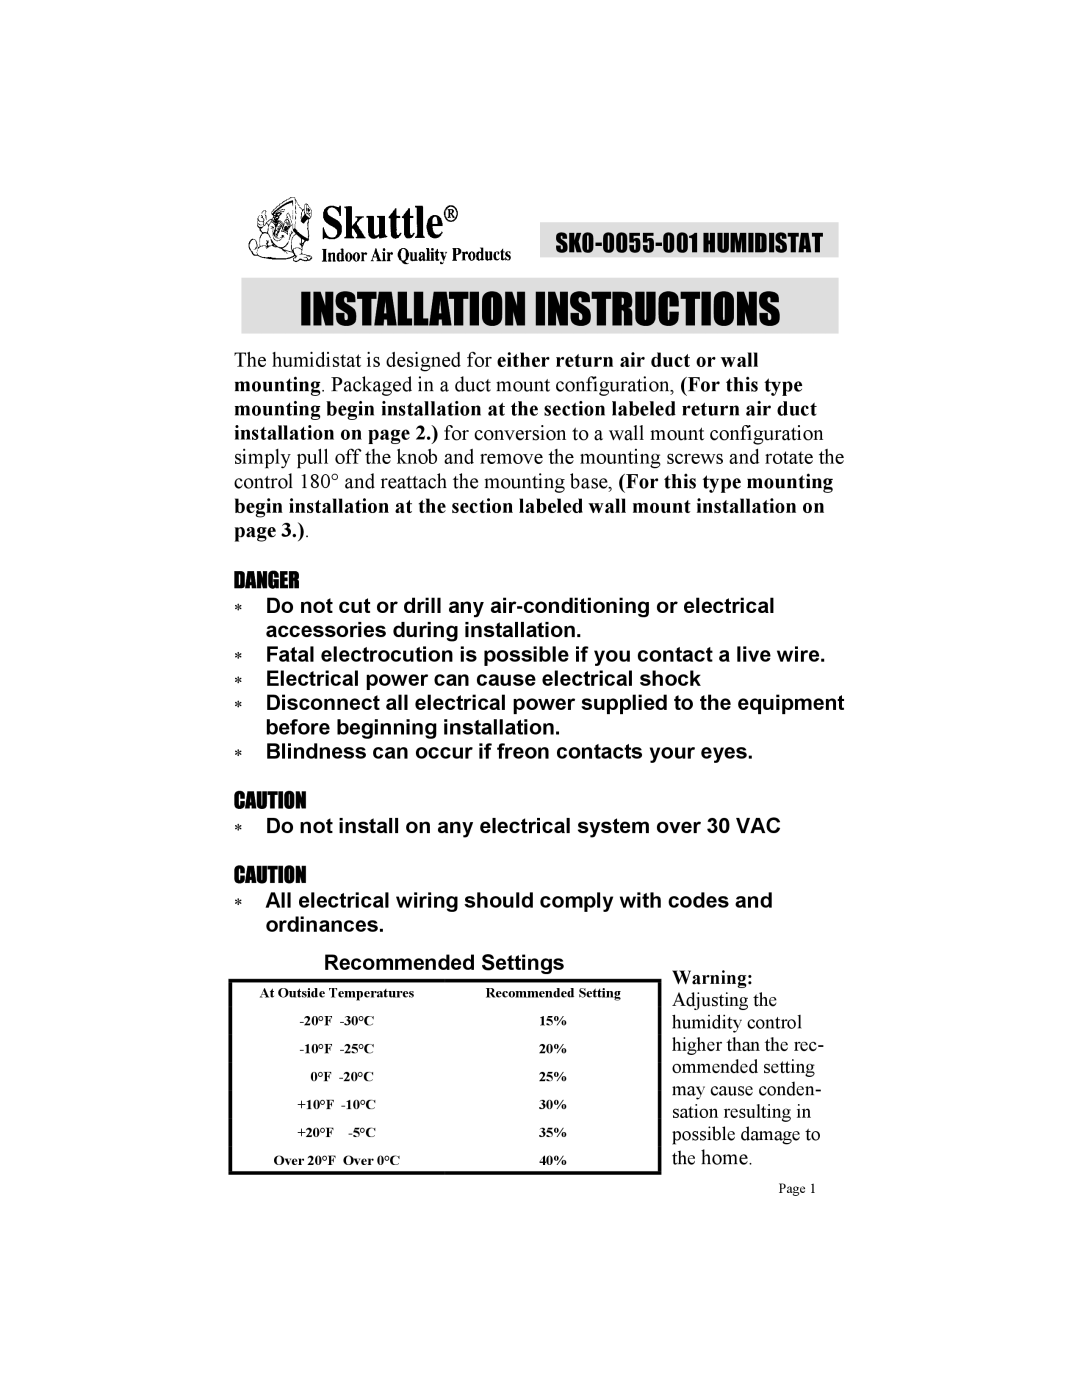 Skuttle Indoor Air Quality Products SK0-0055-001 installation instructions Danger, Installation Instructions 